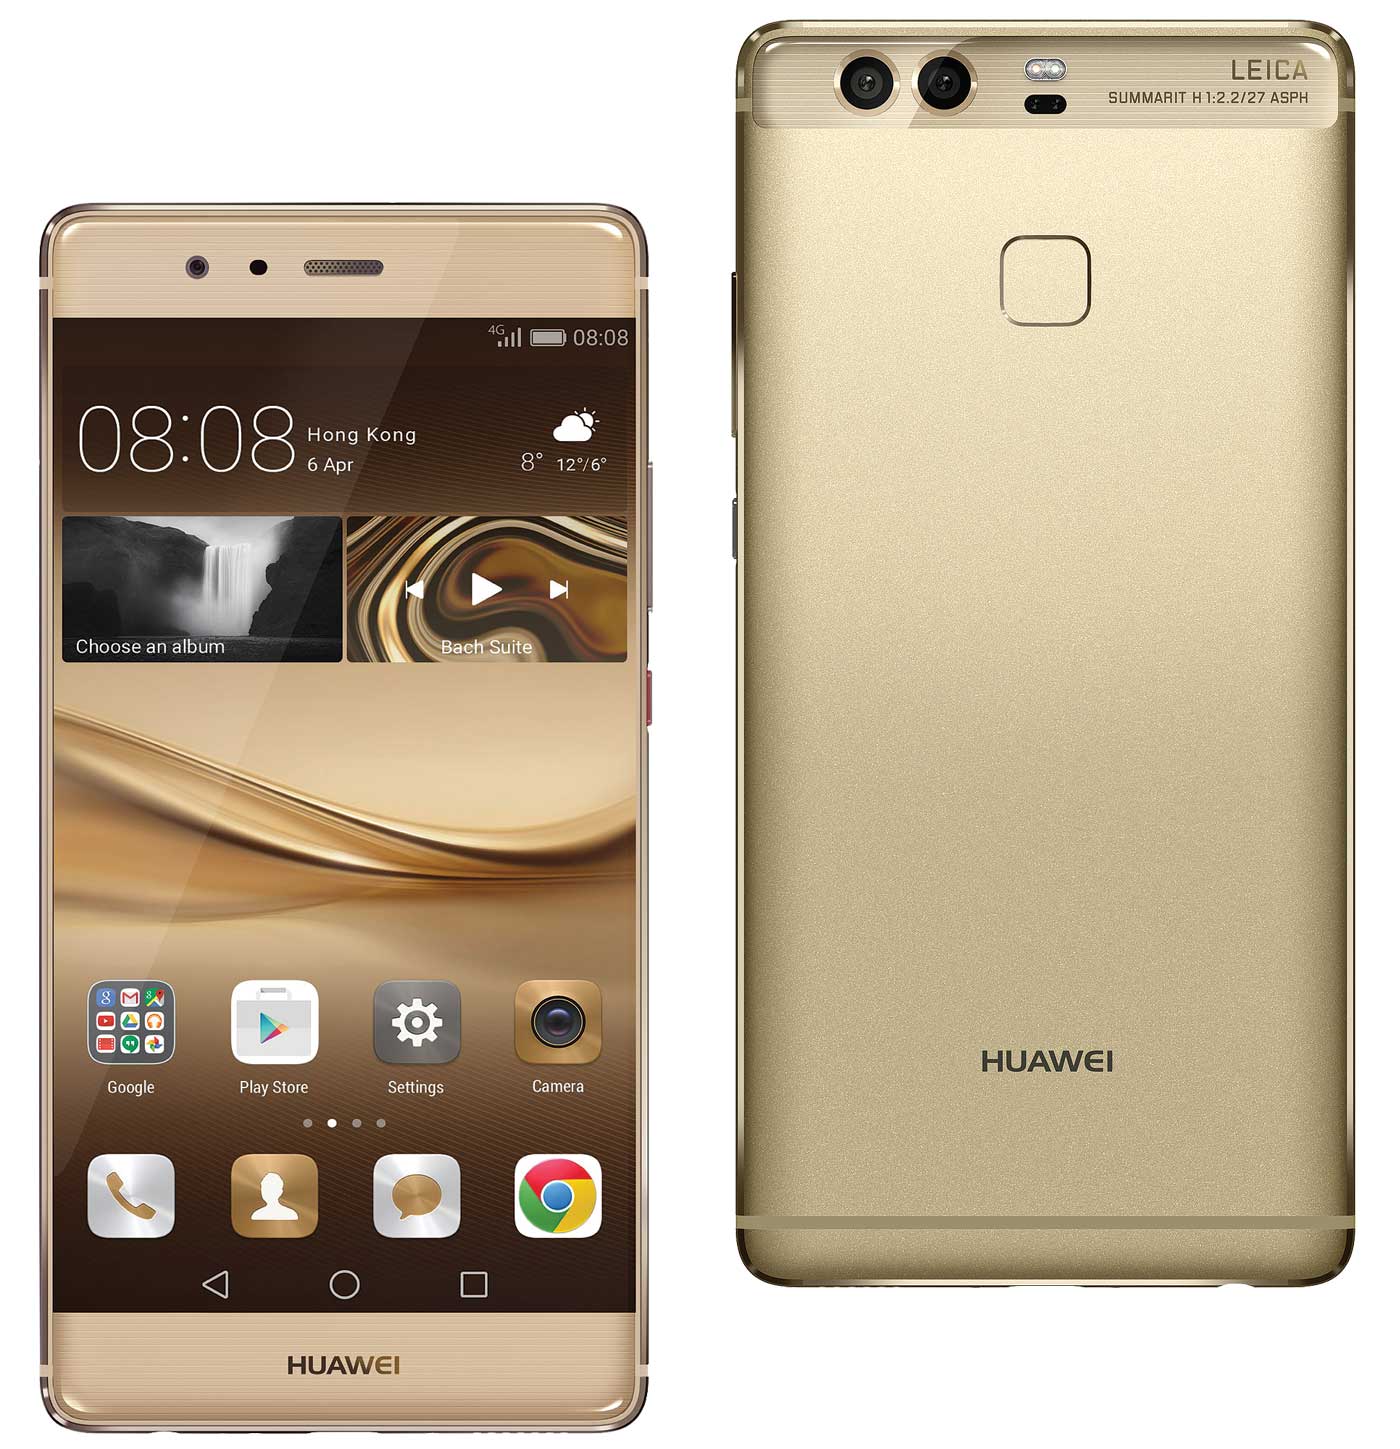 Huawei P9: Pure Photographic Prowess